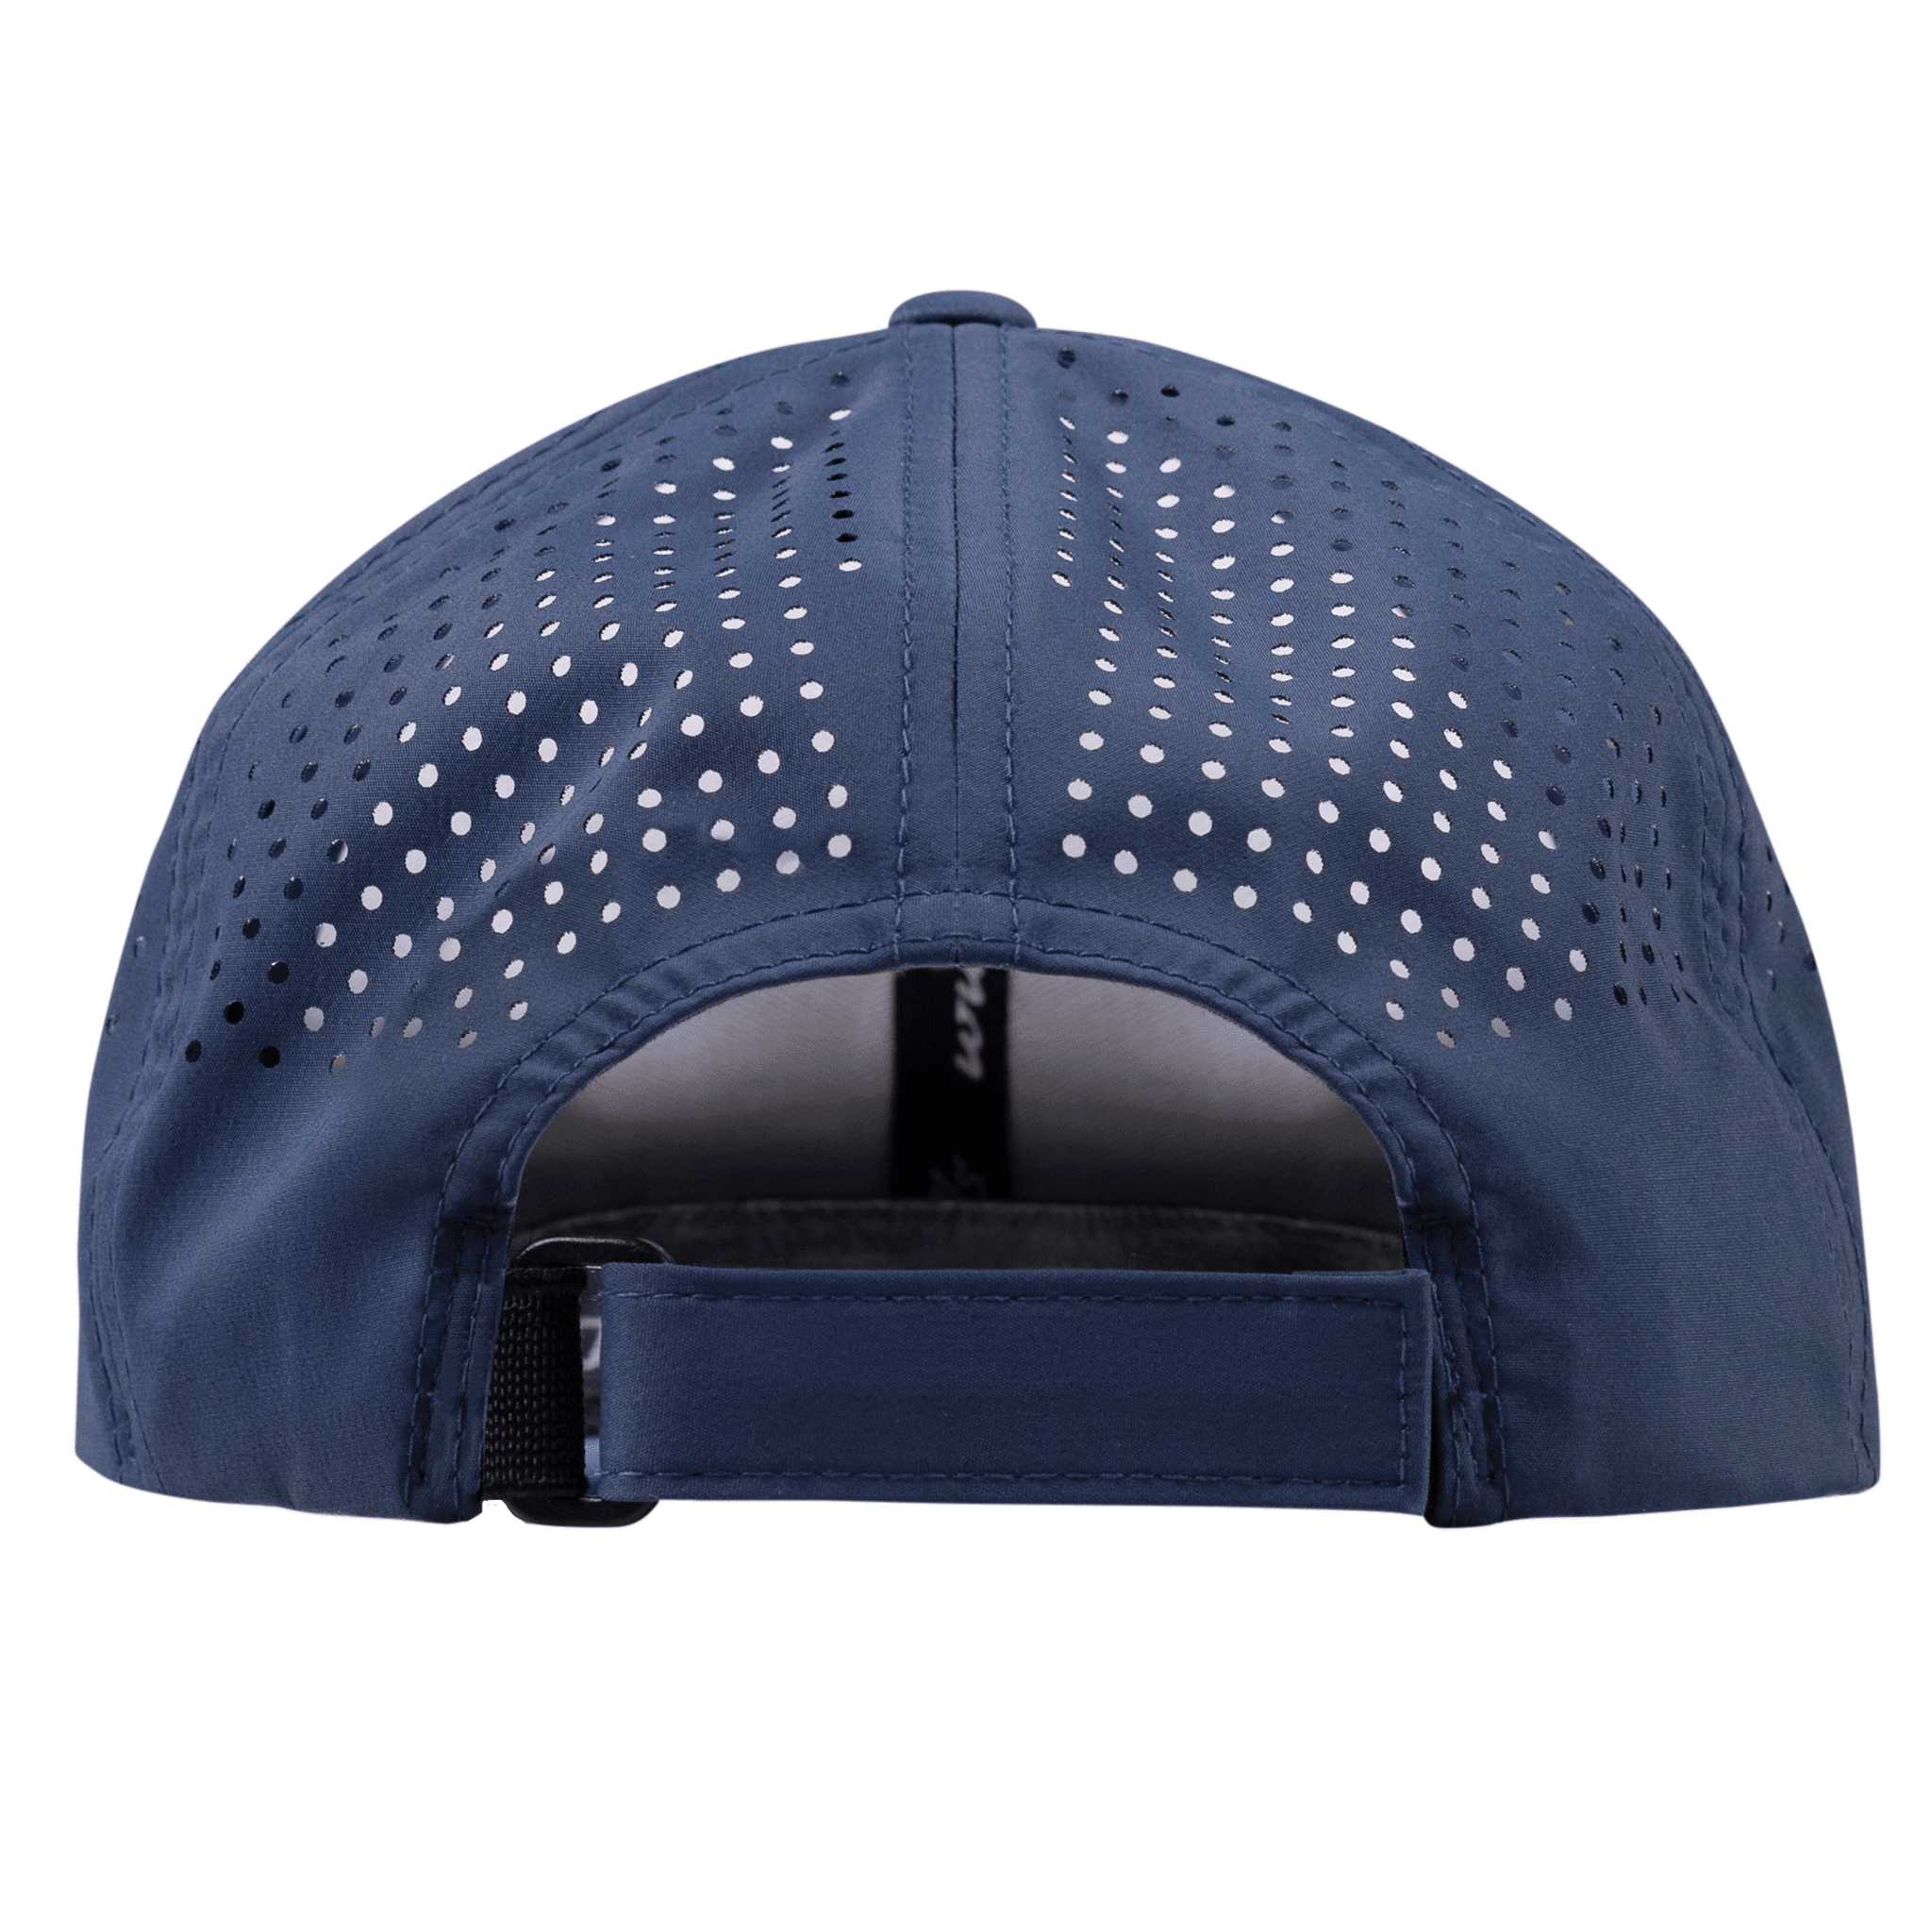 Michigan Patriot Curved Performance Back Navy